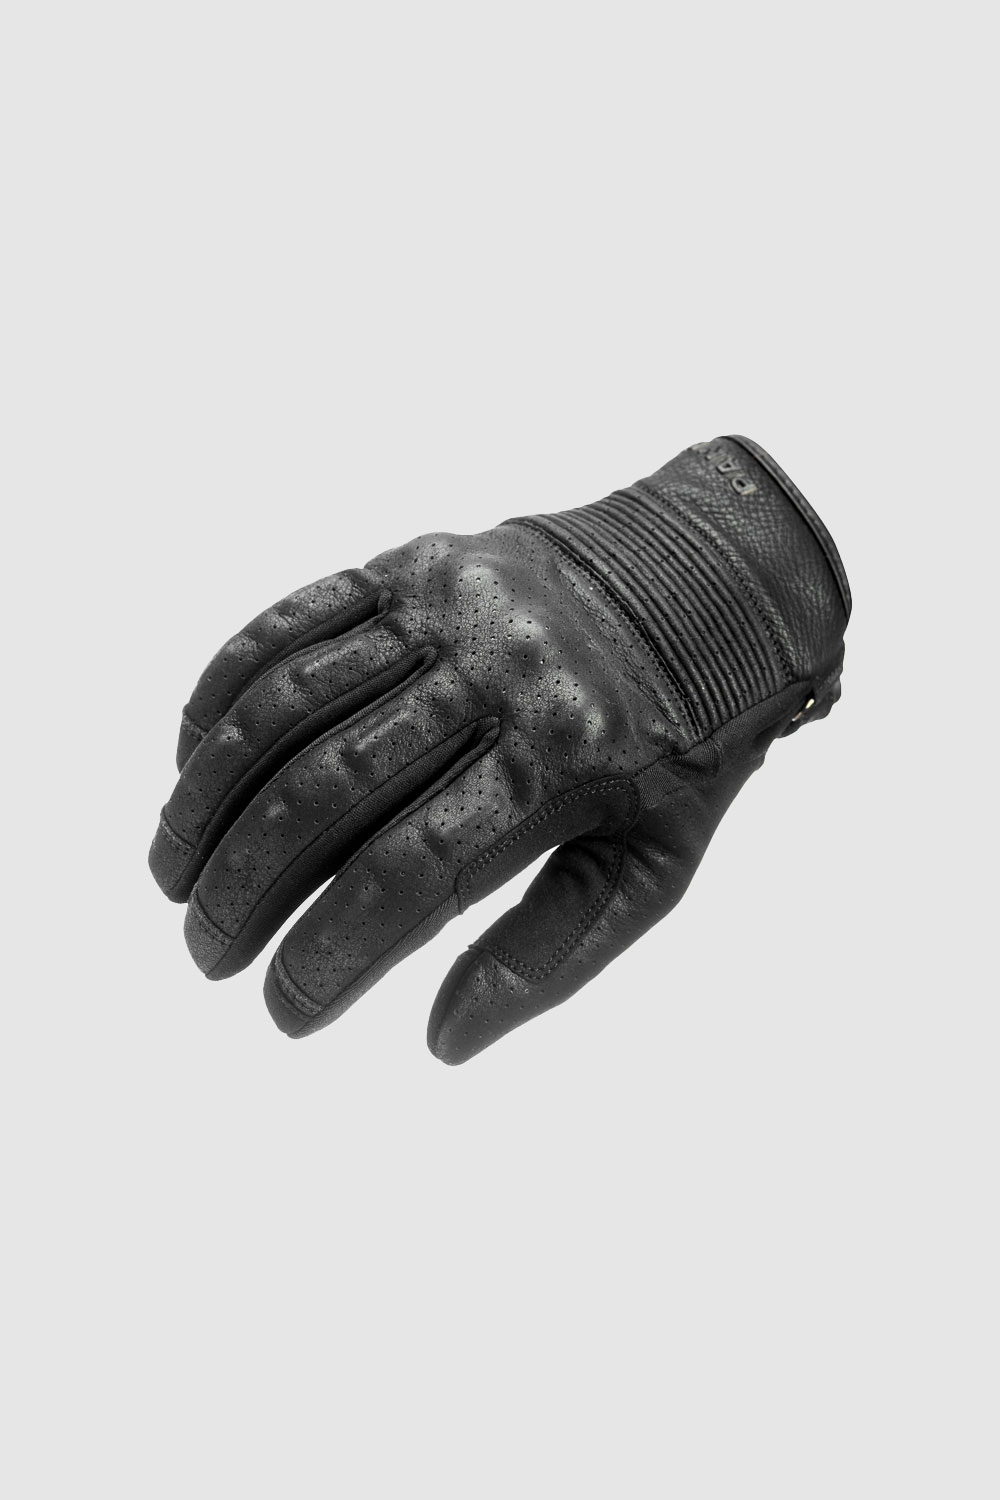 Leather Cold Weather Winter Gloves Cowhide Motorcycle Leather Gloves 